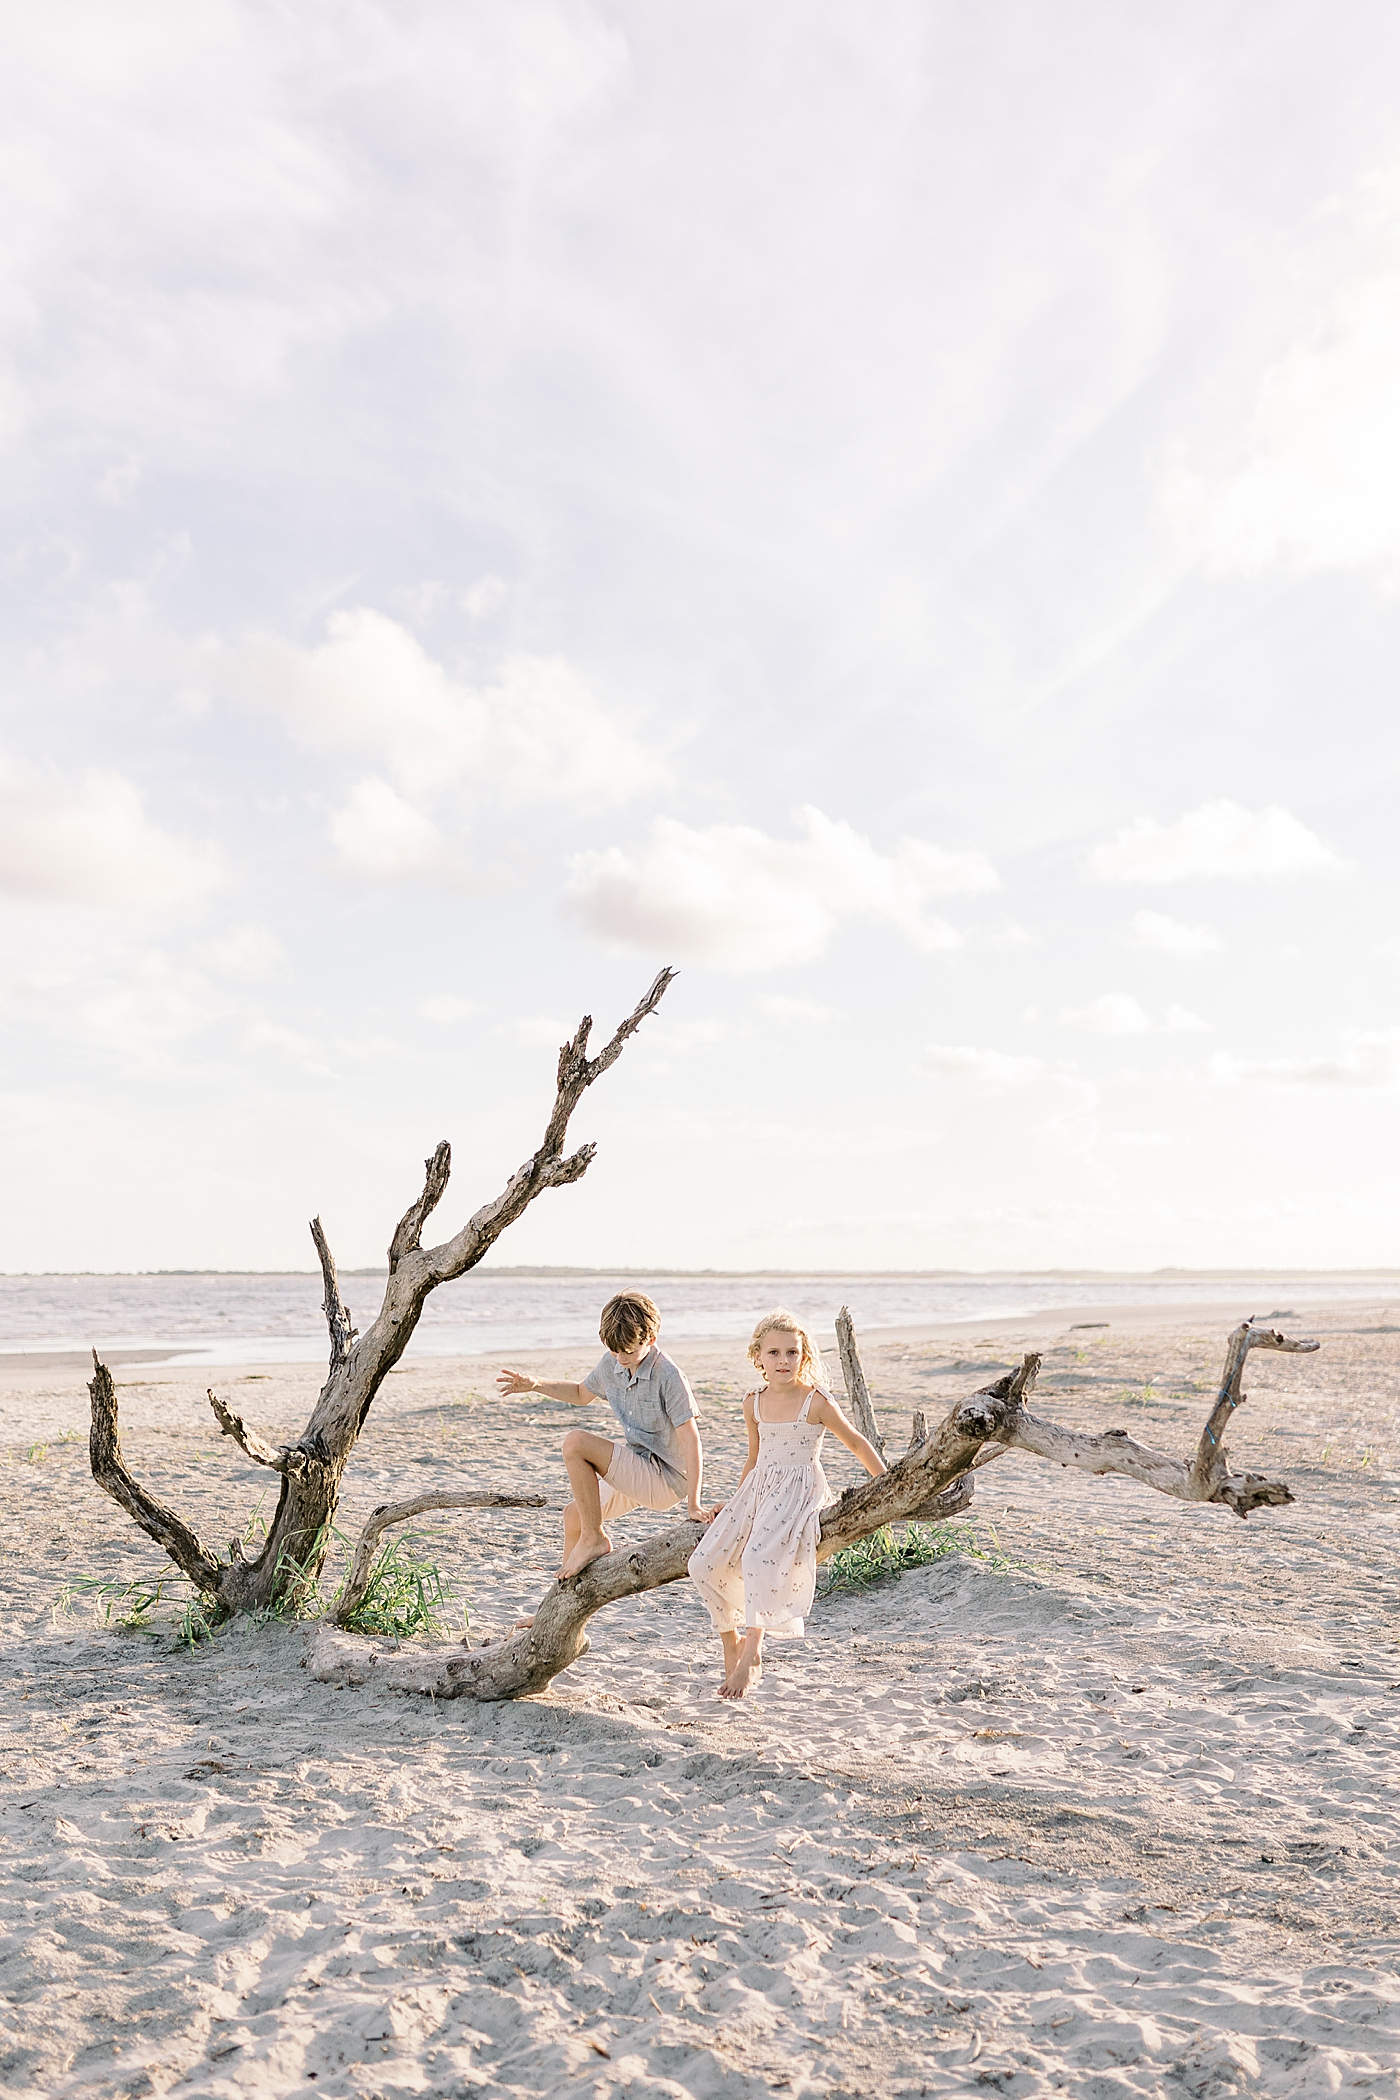 Little boy and girl sitting on a fallen tree during their Maternity Session at Folly Beach | Image by Caitlyn Motycka